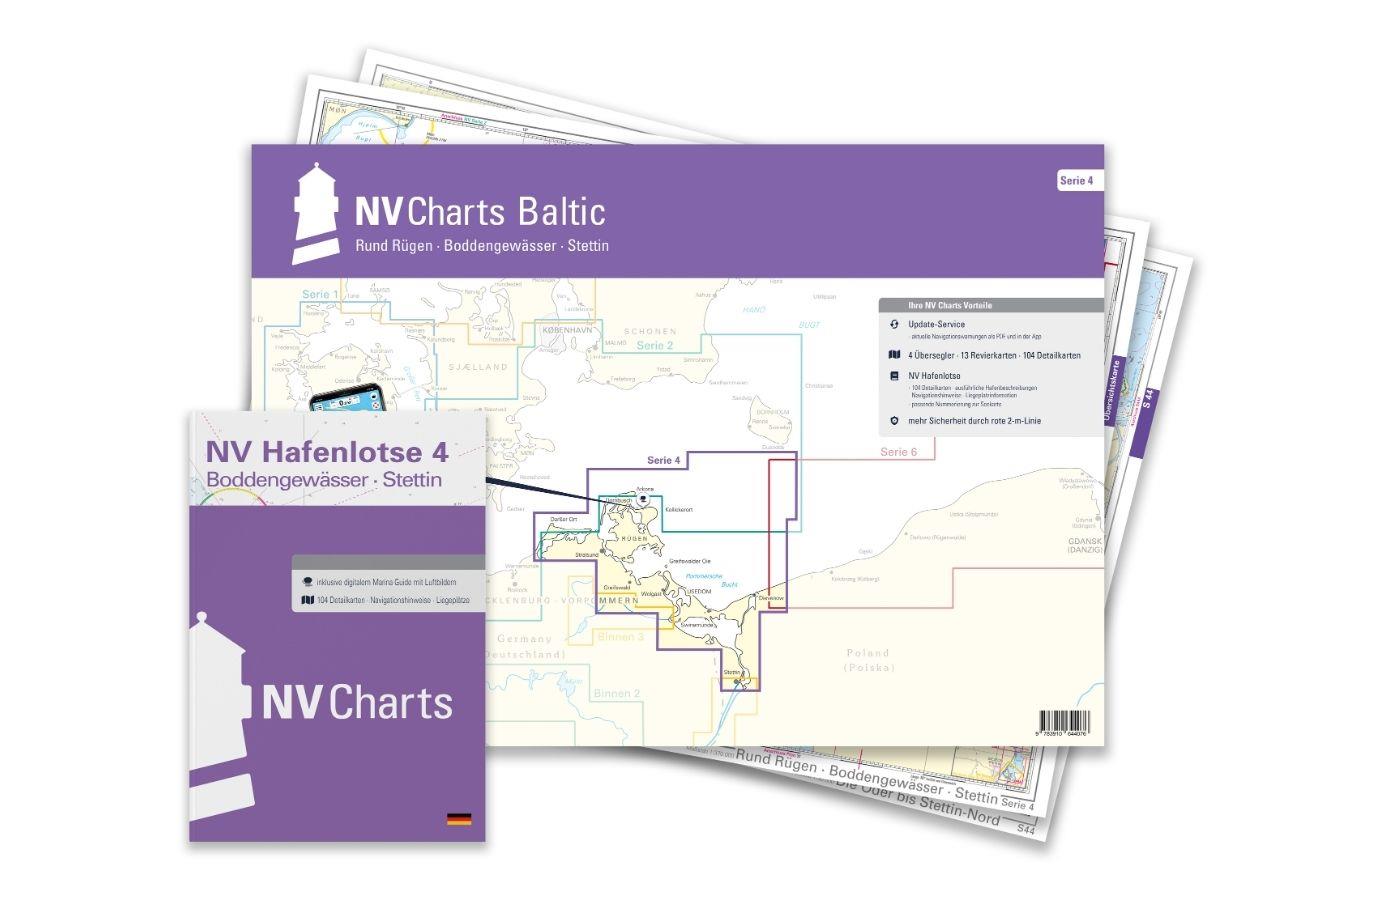 NV Charts Baltic Plano Kartenkoffer Ostsee Serie 1, 2, 3, 4